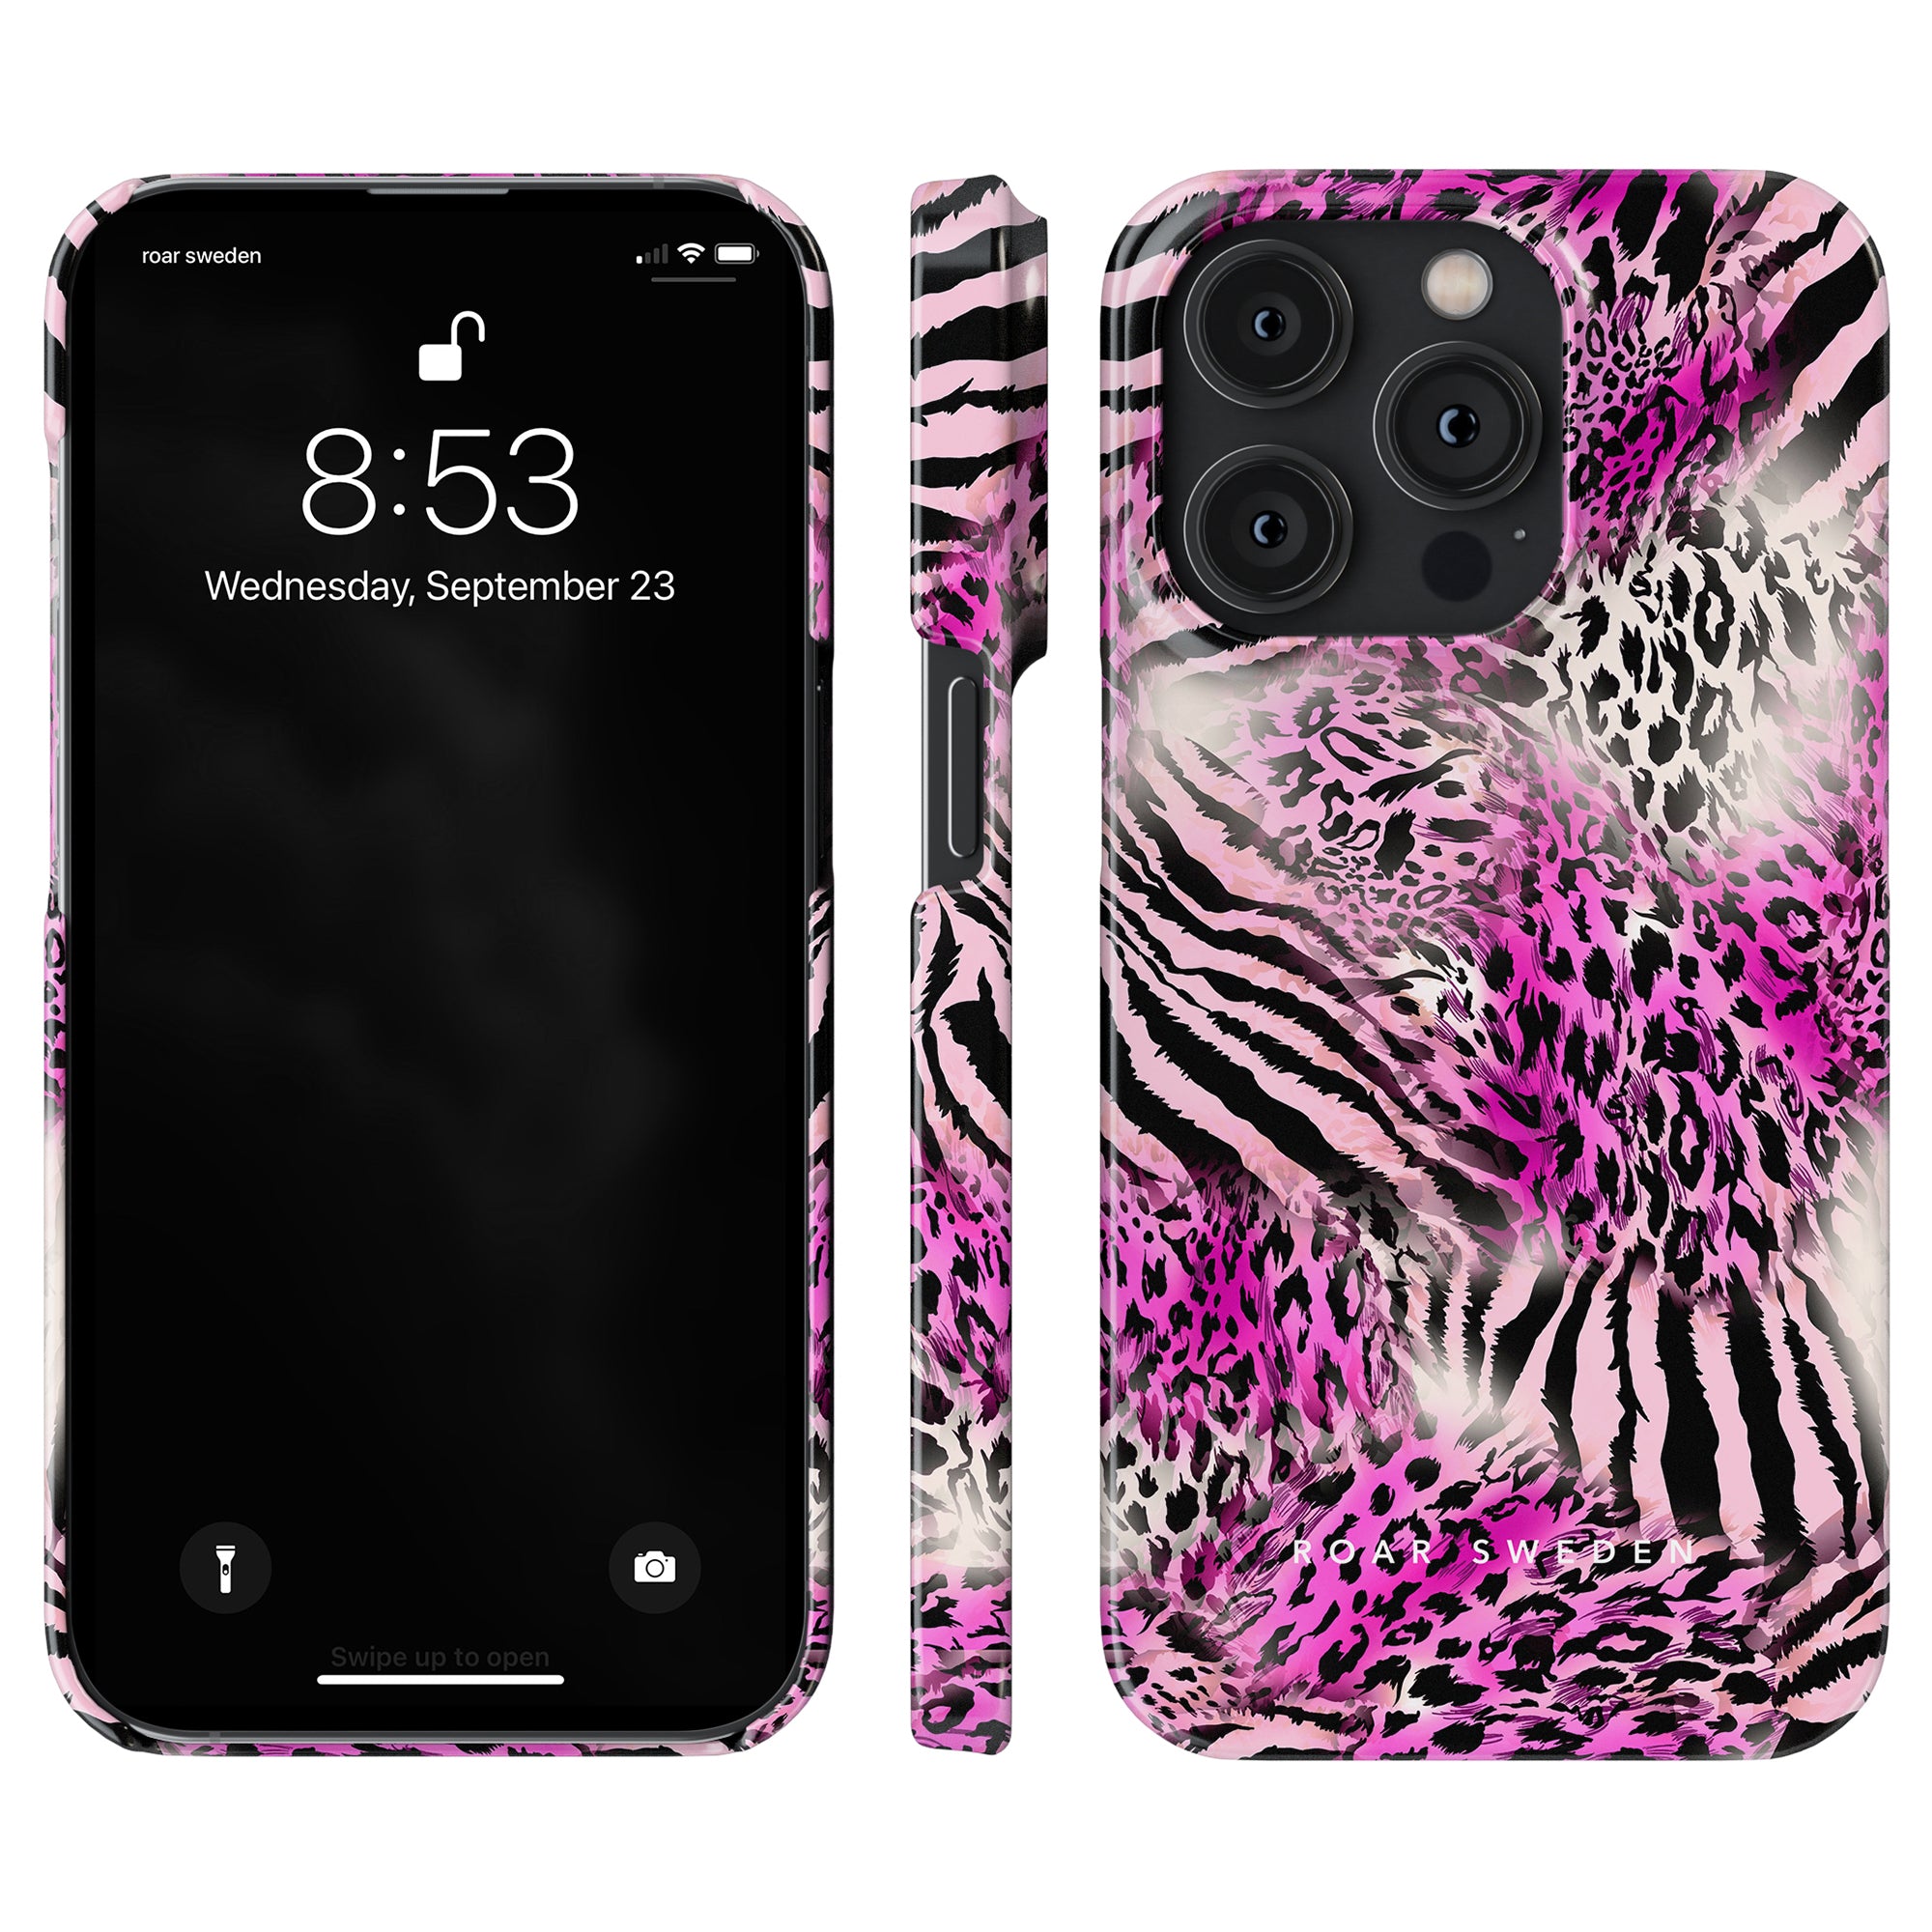 A Savannah Fuchsia - Slim case with an exotisk design, perfect for the iPhone 11.